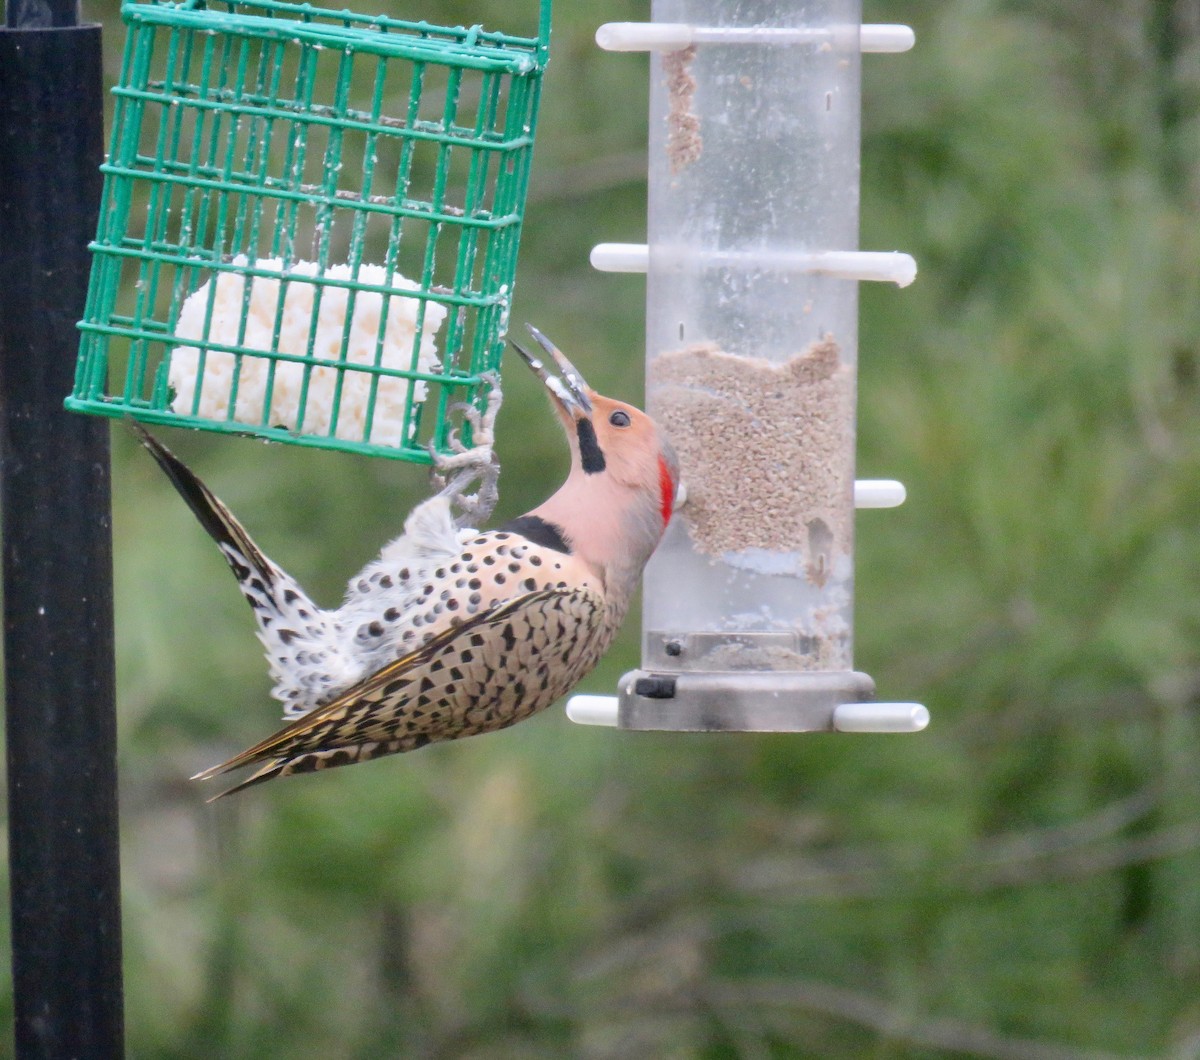 Northern Flicker (Yellow-shafted) - Ann Tanner